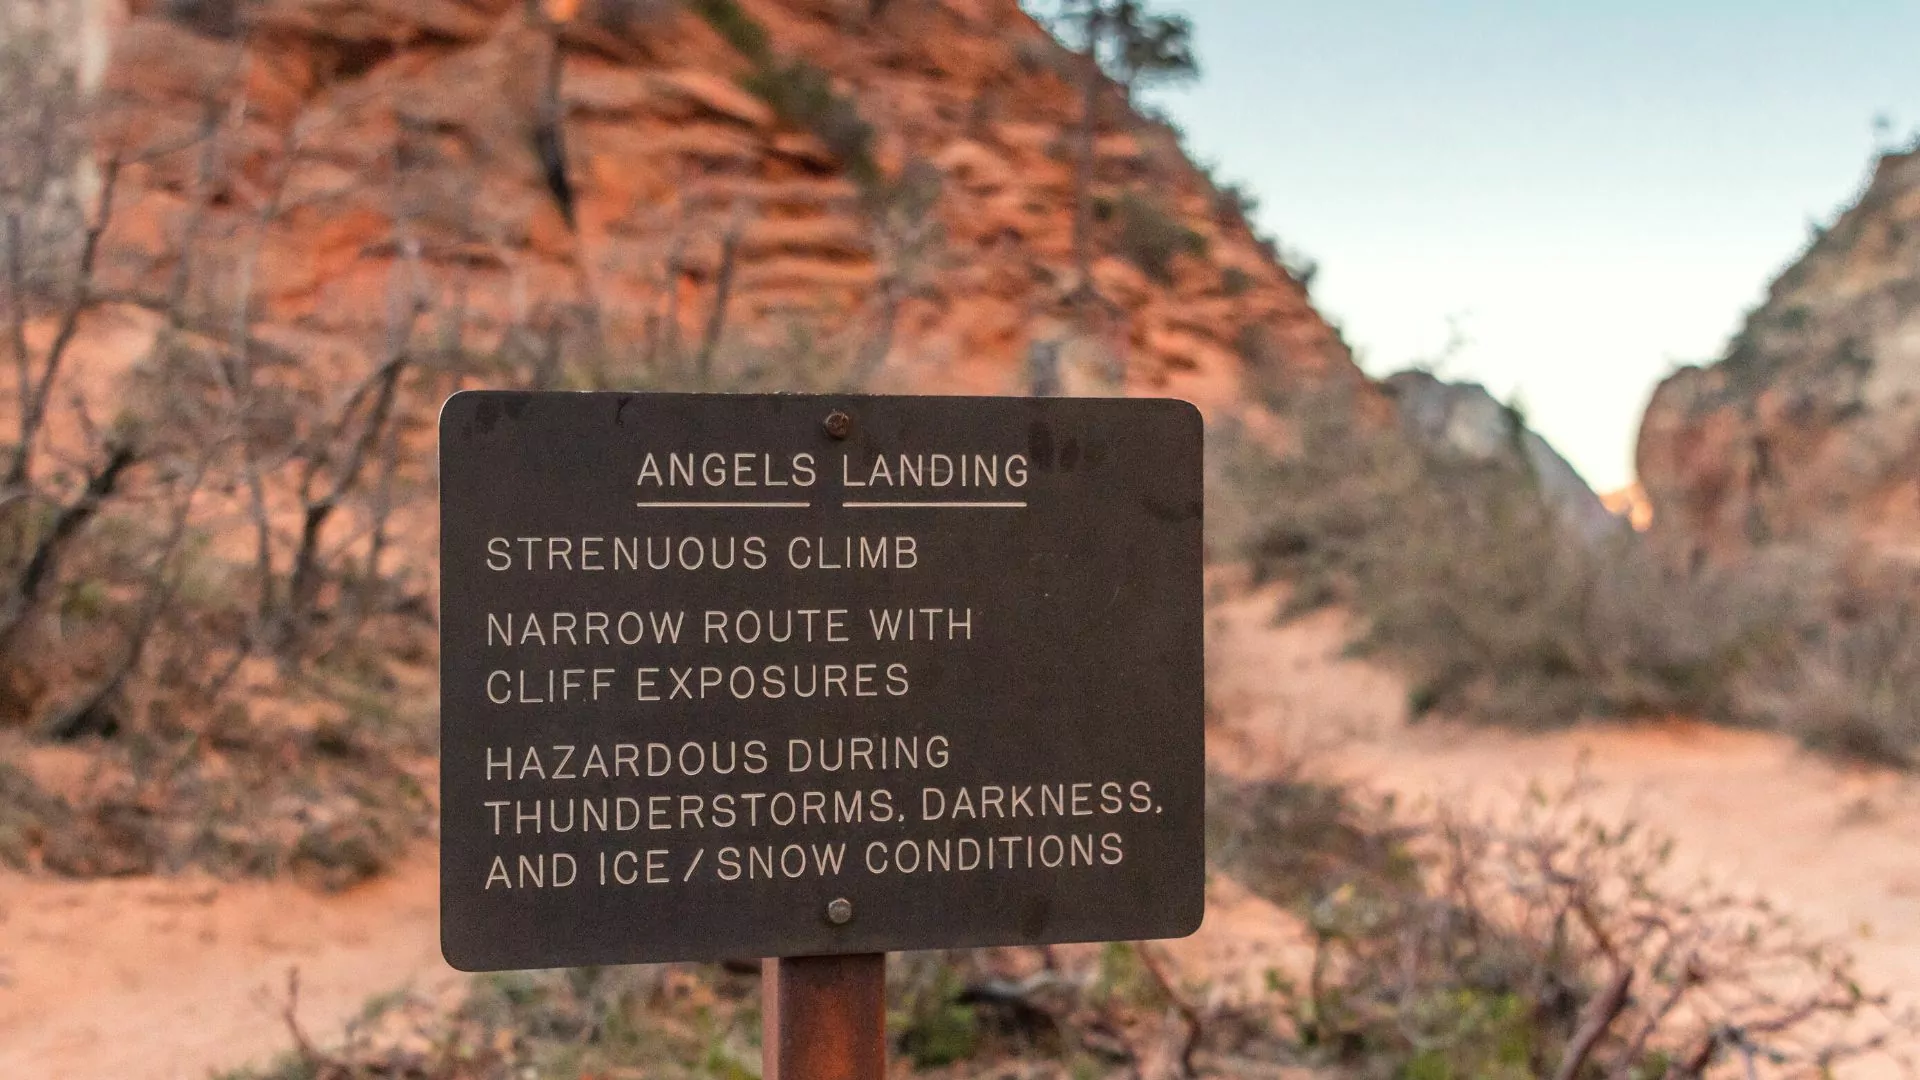 Warning sign about dangers of Angels Landing hike Zion